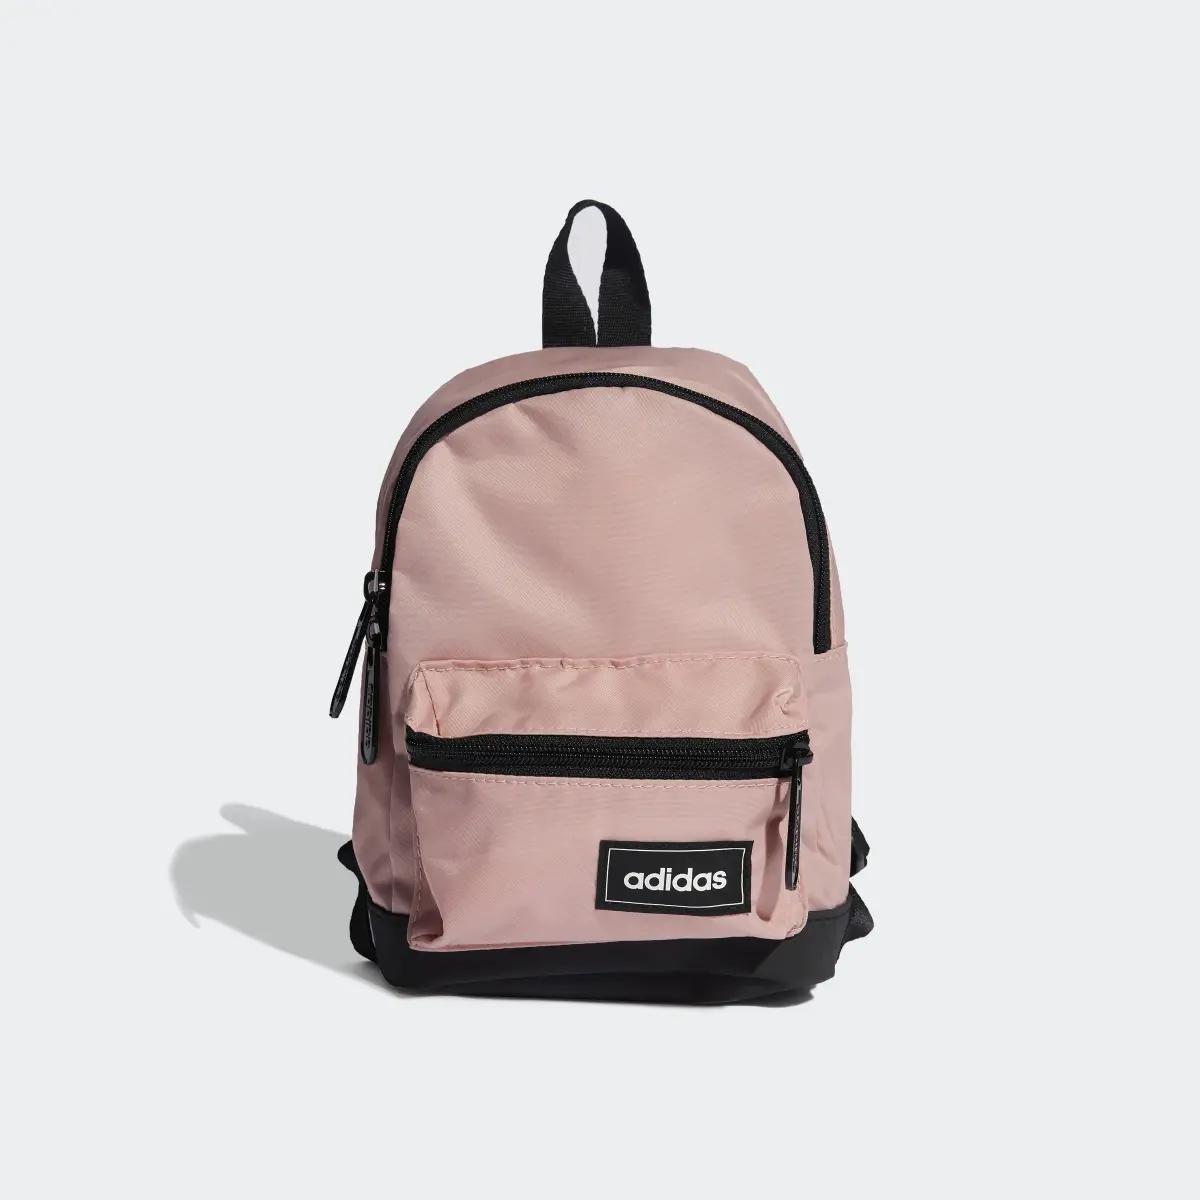 Adidas Tailored For Her Material Backpack Extra Small. 2